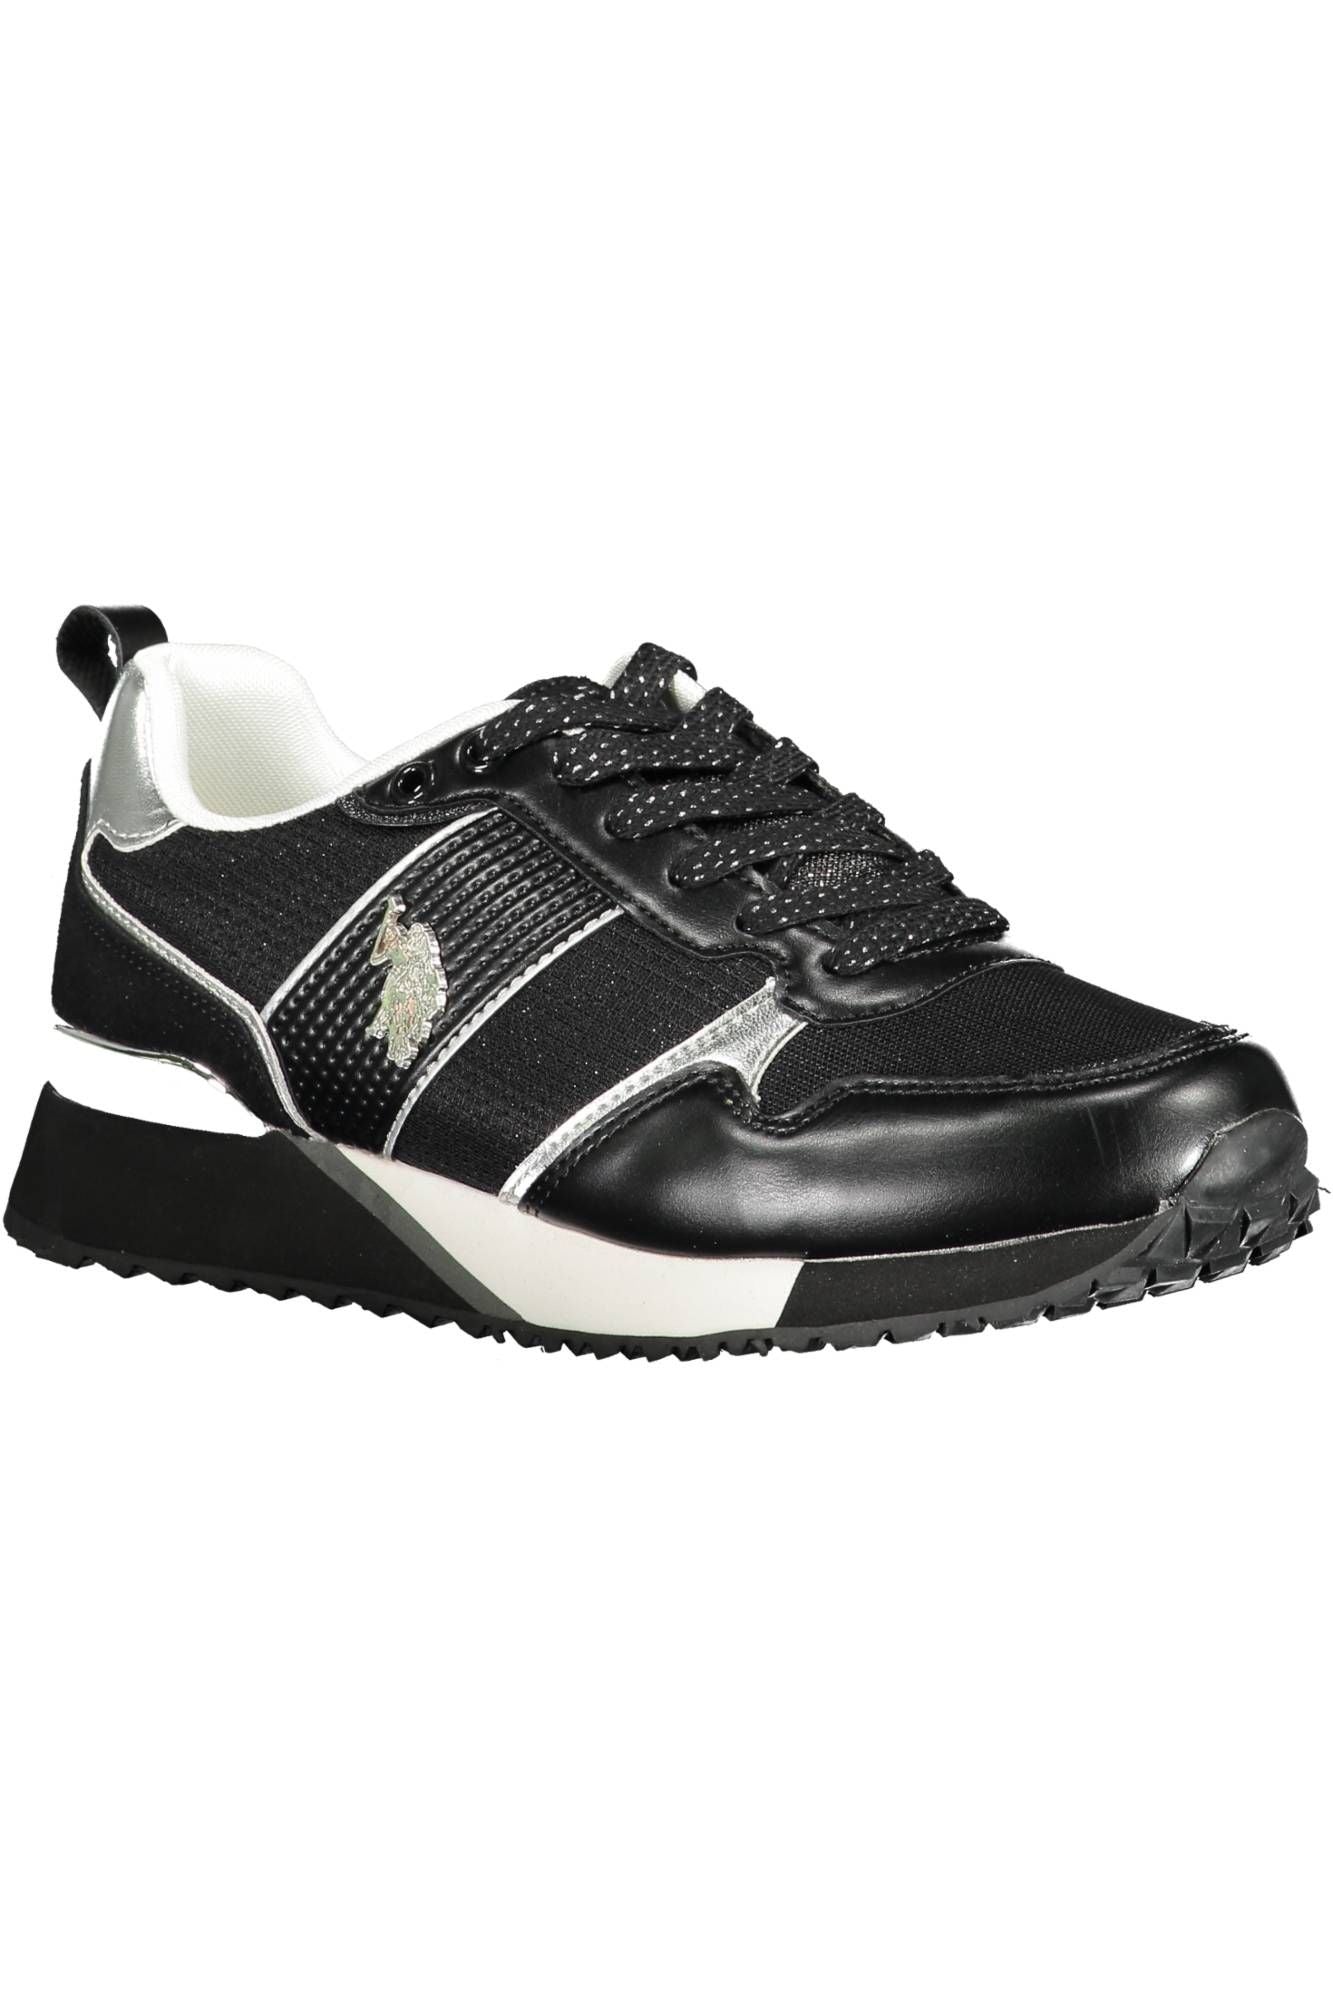 U.S. POLO ASSN. Chic White Sneakers with Memory Sole